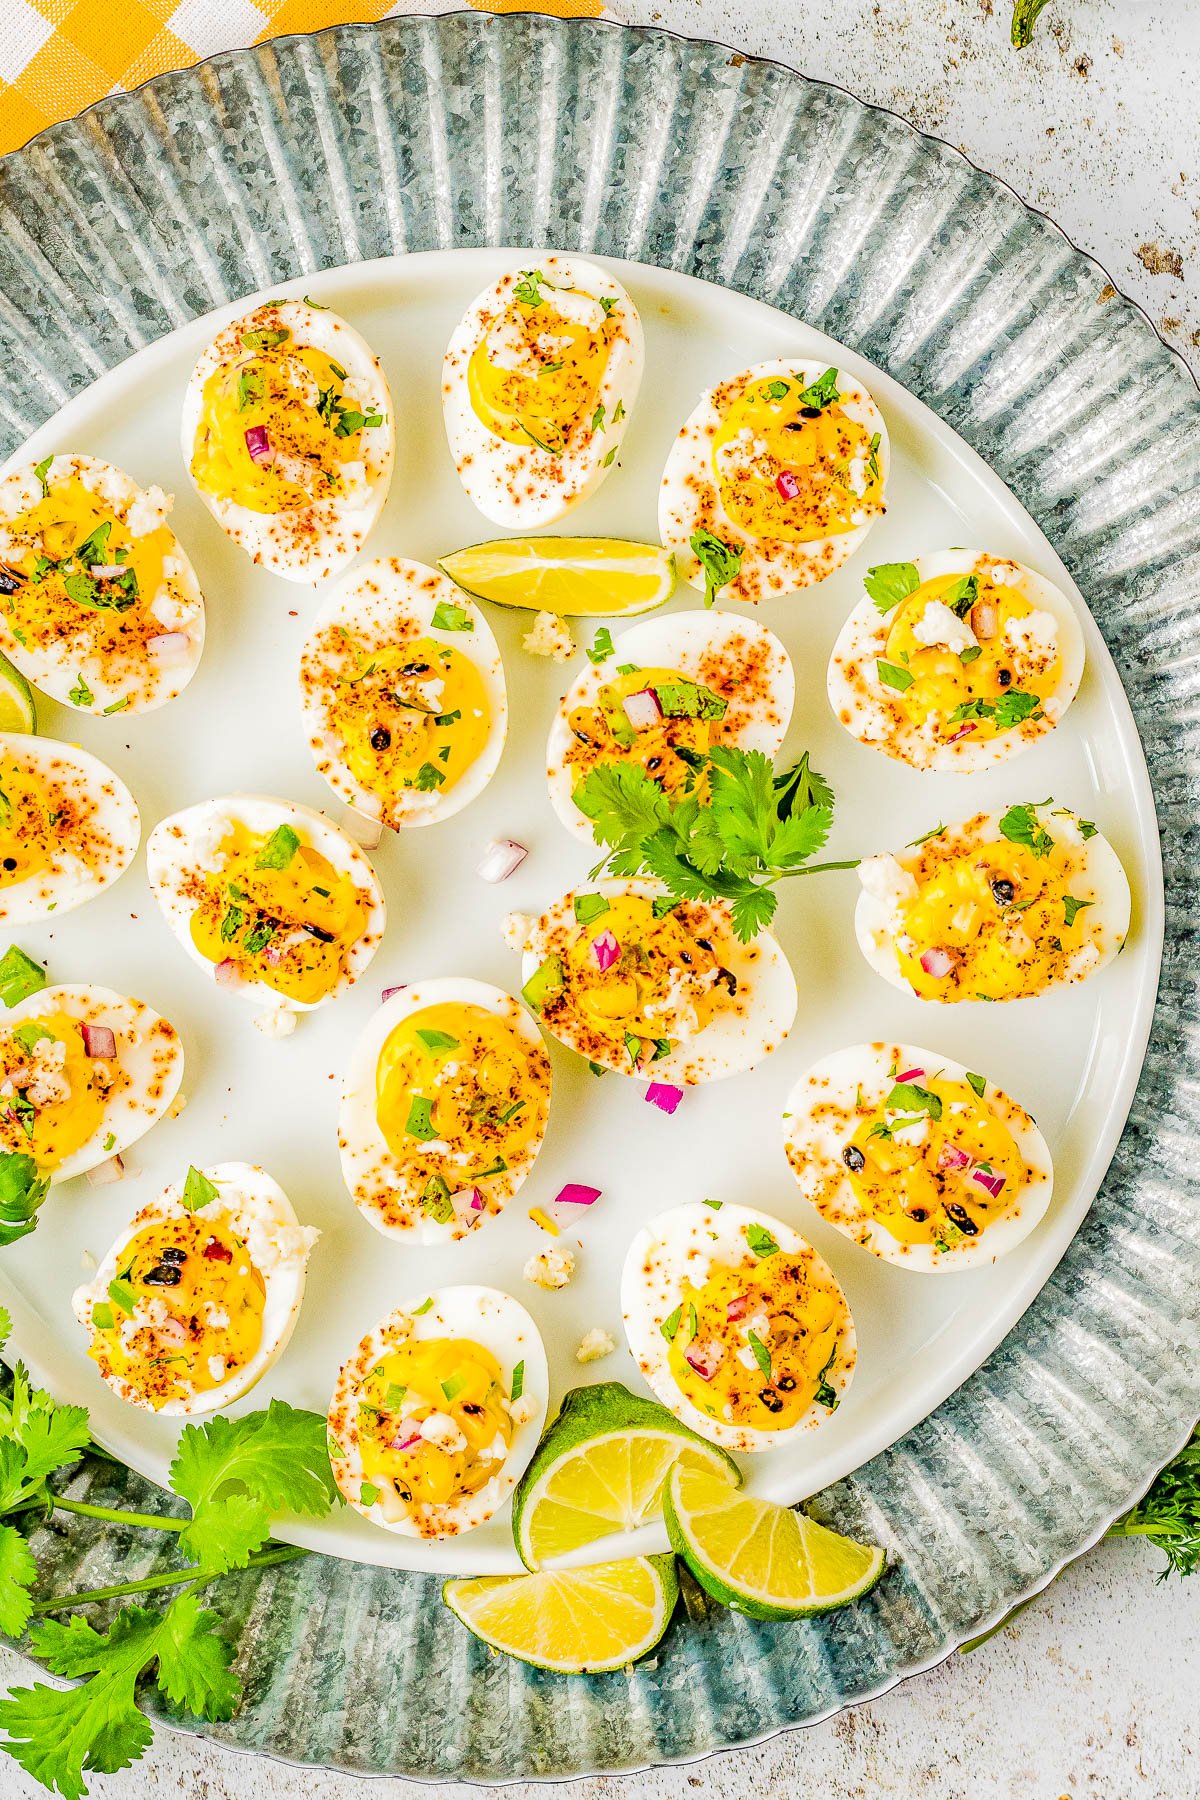 Mexican Street Corn Deviled Eggs - Deviled eggs get a south-of-the-border makeover by incorporating grilled Mexican street corn, jalapeno, red onion, cilantro, lime juice, queso fresco, and chili powder! This is an EASY appetizer or picnic recipe that everyone adores! Serve these at your next summer event including Memorial Day, Father's Day, Fourth of July, or make them for game day parties! 